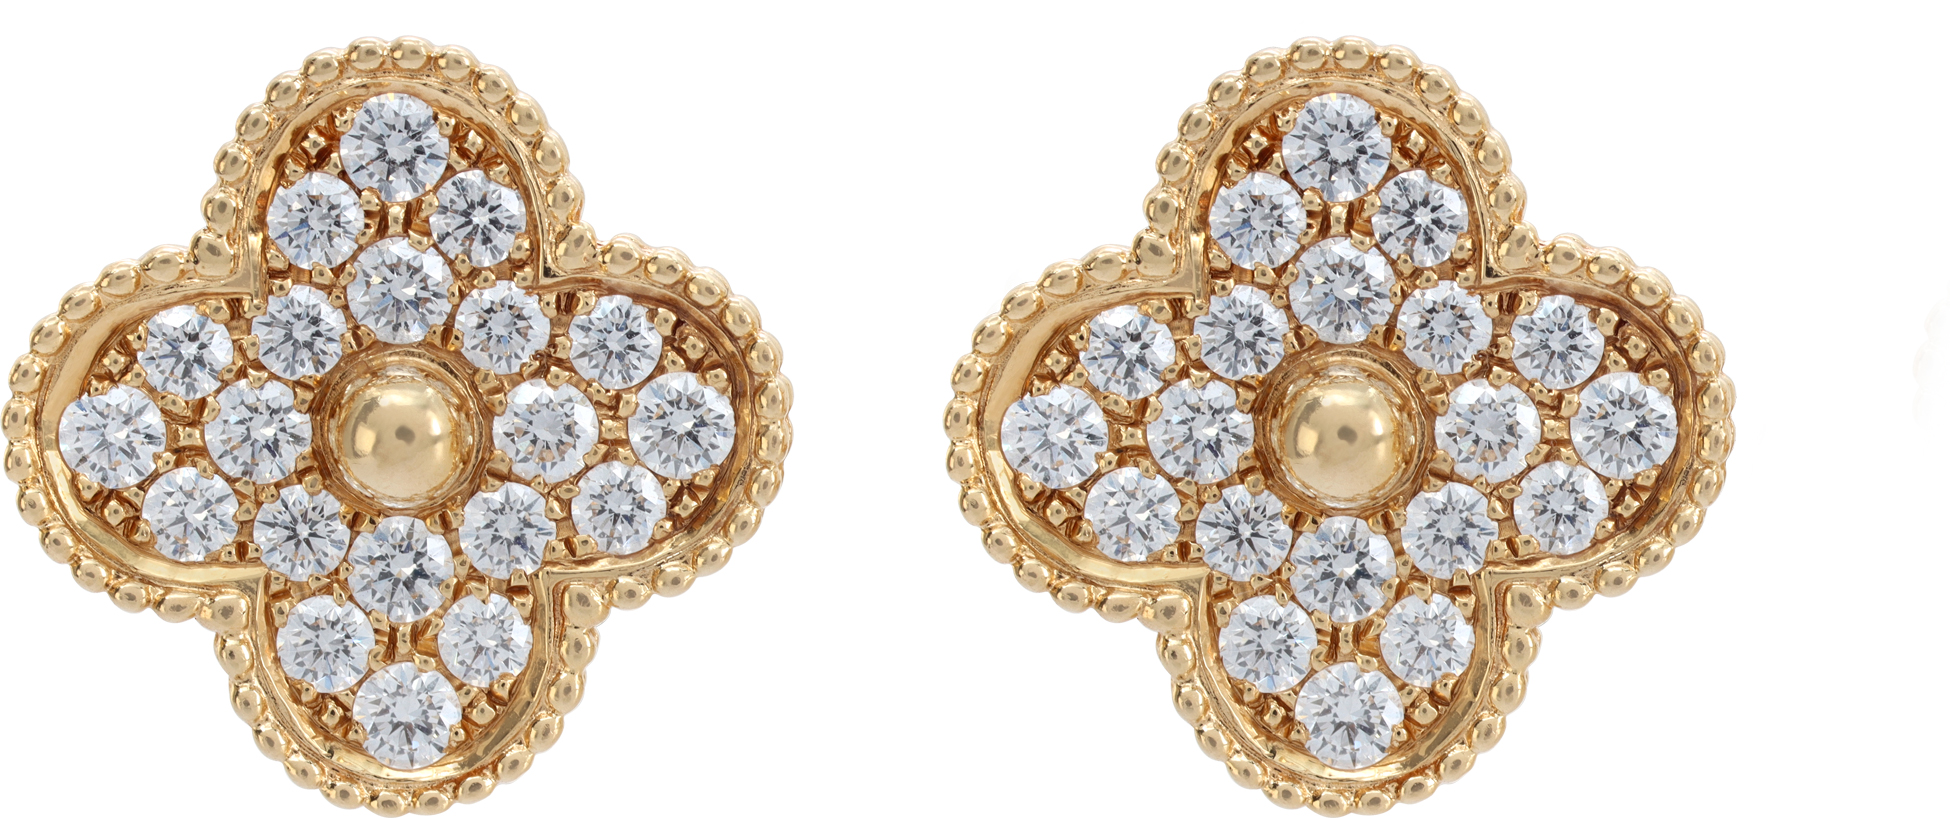 Van Cleef and Arpels Vintage Alhambra Large pave diamond earrings in 18k yellow gold